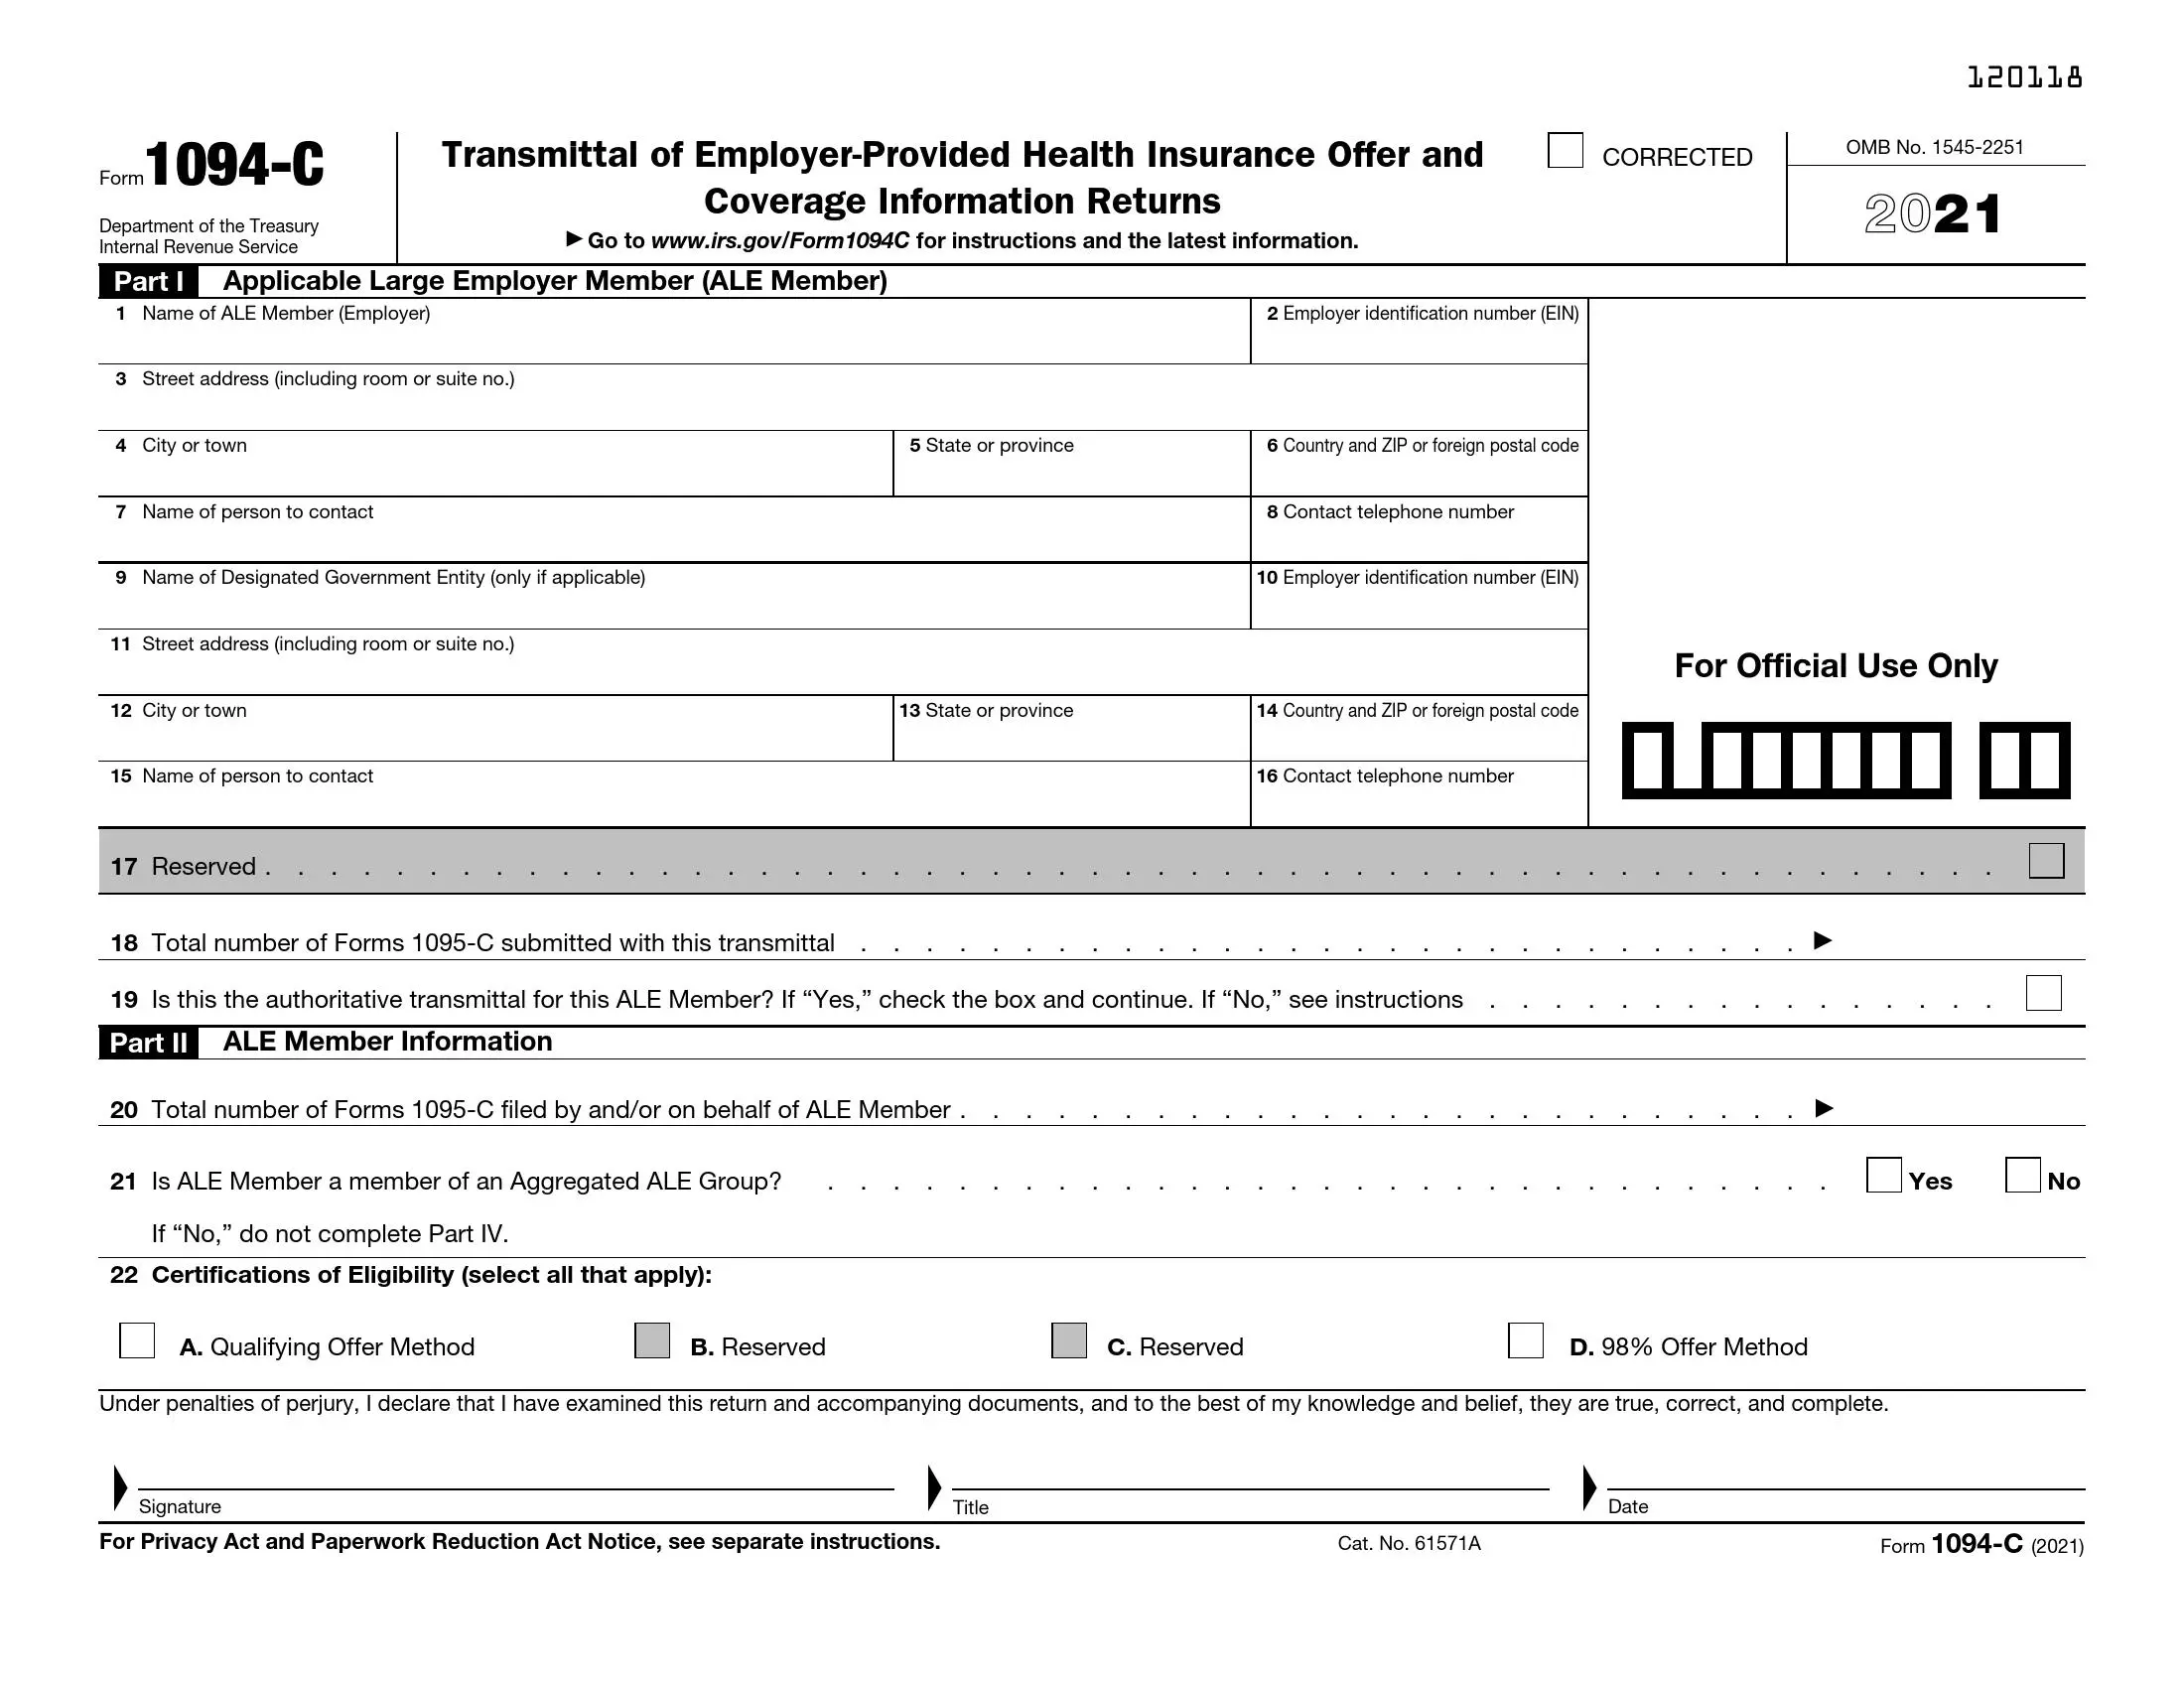 irs form 1094-c 2021 preview